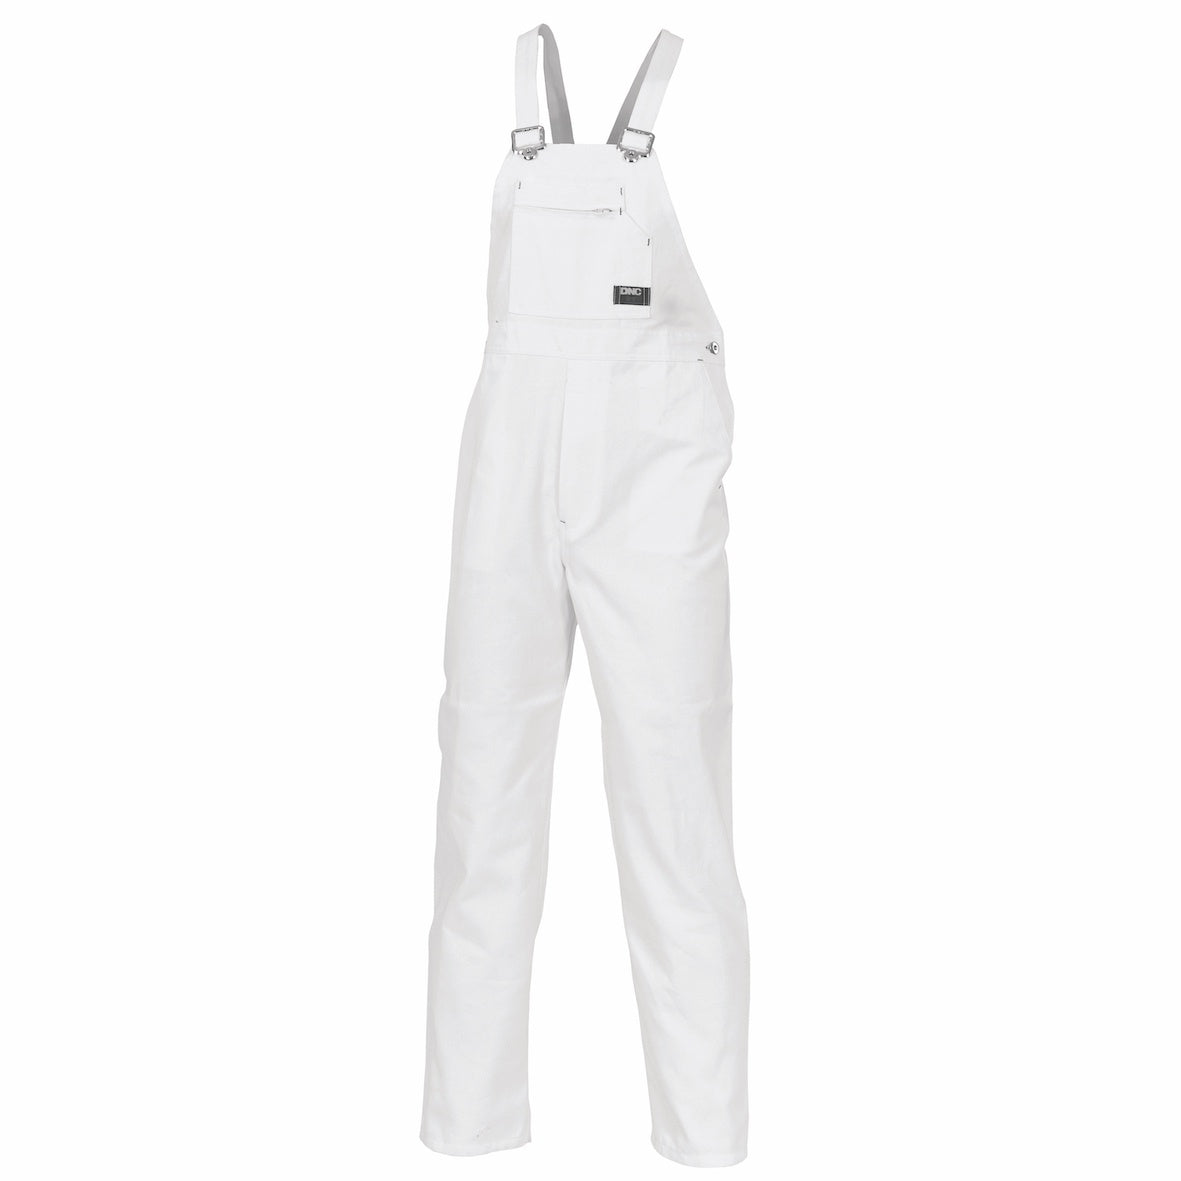 DNC - 3111 - Heavy Weight Cotton Drill Bib and Brace Overall